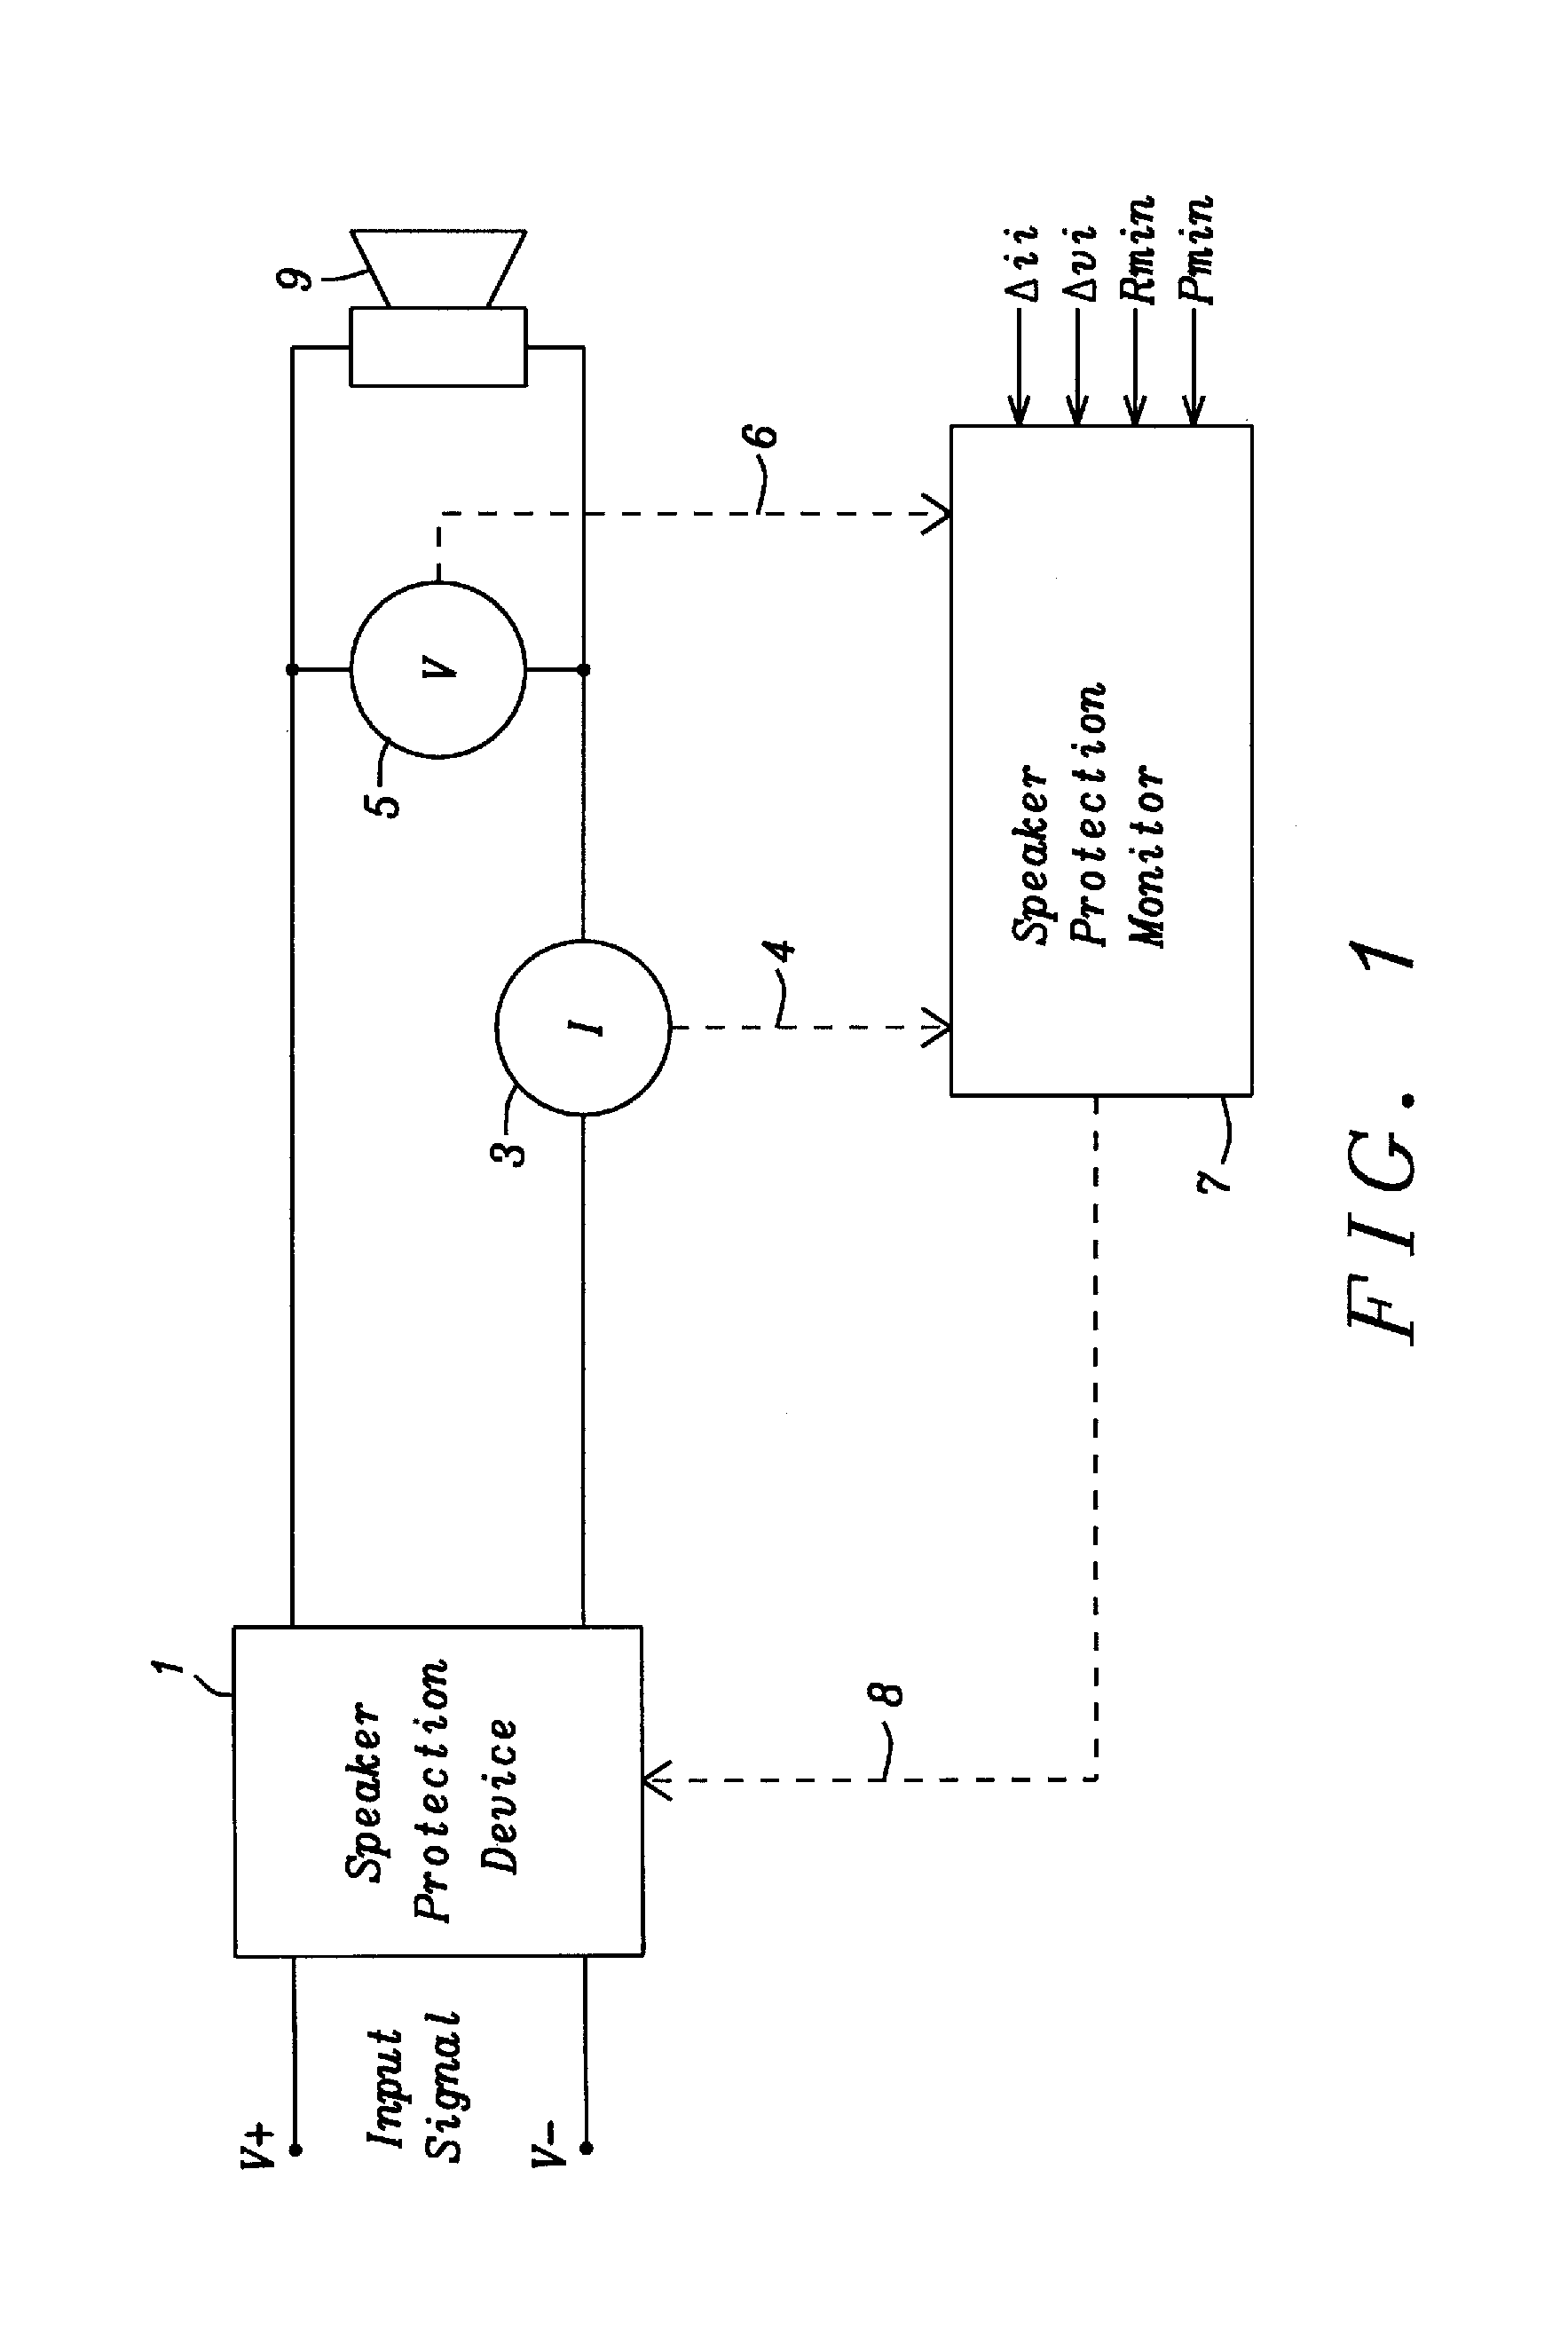 Method and apparatus for computing metric values for loudspeaker protection